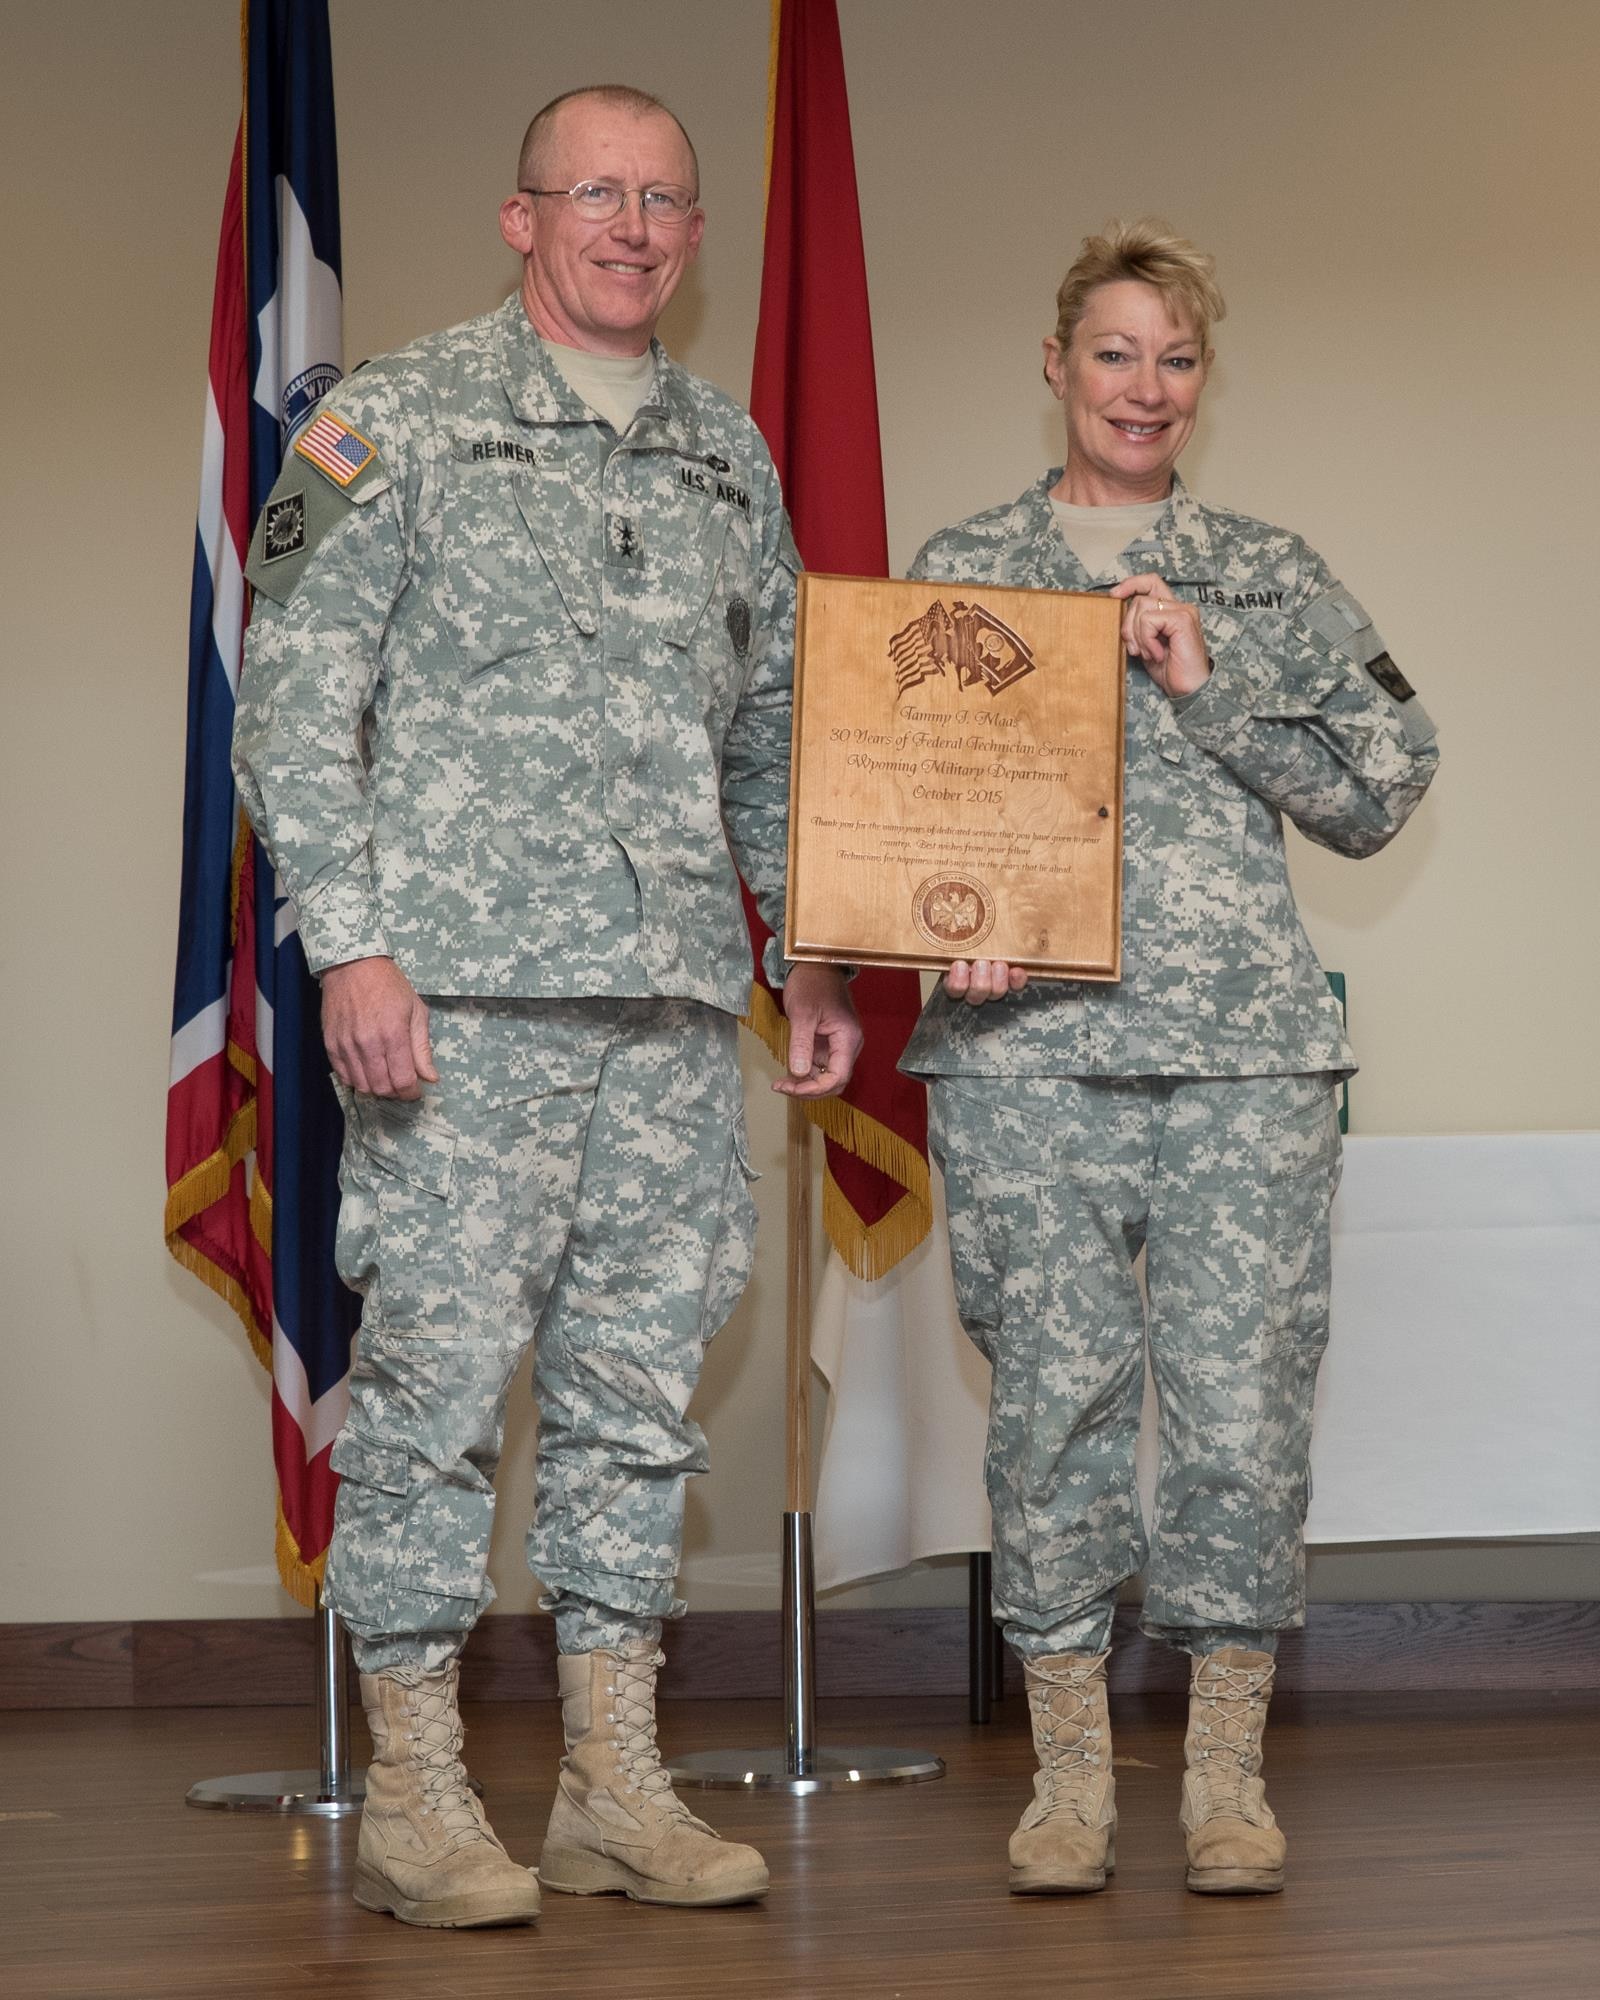 Maj. Gen. Luke Reiner, Wyoming adjutant general, and Brig. Gen. Tammy Maas, assistant adjutant general-Army, celebrate Maas' 30 years of federal technician service at a celebration at the Joint Force Readiness Center, Cheyenne, Wyoming, August 2015. (Photo by Master Sgt. Charles Delano)